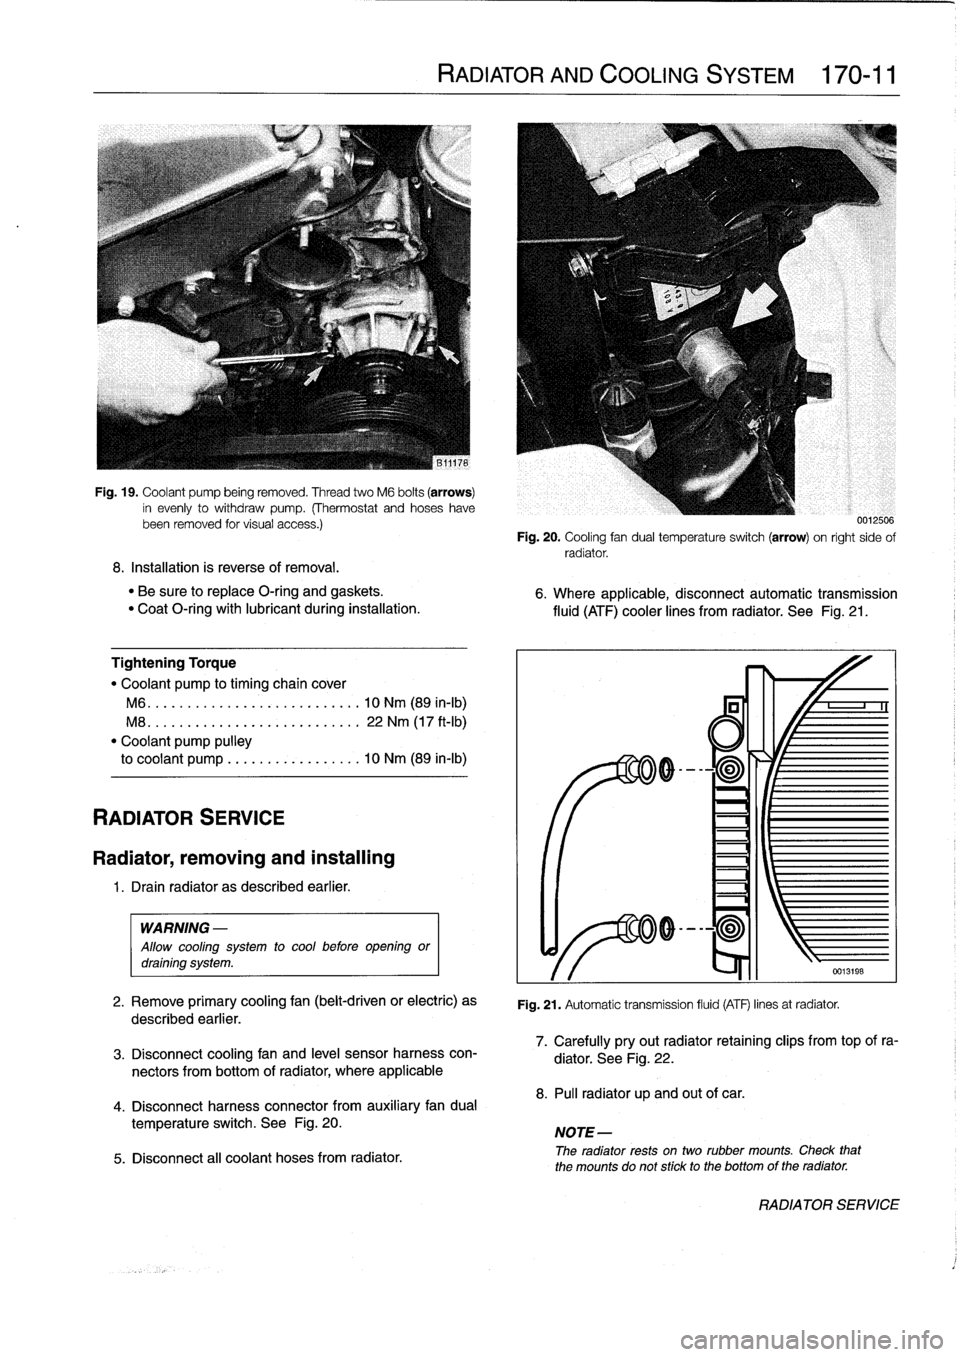 BMW 325i 1997 E36 Service Manual 
Fig
.
19
.
Coolant
pump
being
removed
.
Thread
two
M6
bolts
(arrows)
in
evenly
to
withdraw
pump
.
(Thermostat
and
hoseshavebeen
removed
tor
visual
access
.)

8
.
Installation
is
reverse
of
removal
.
